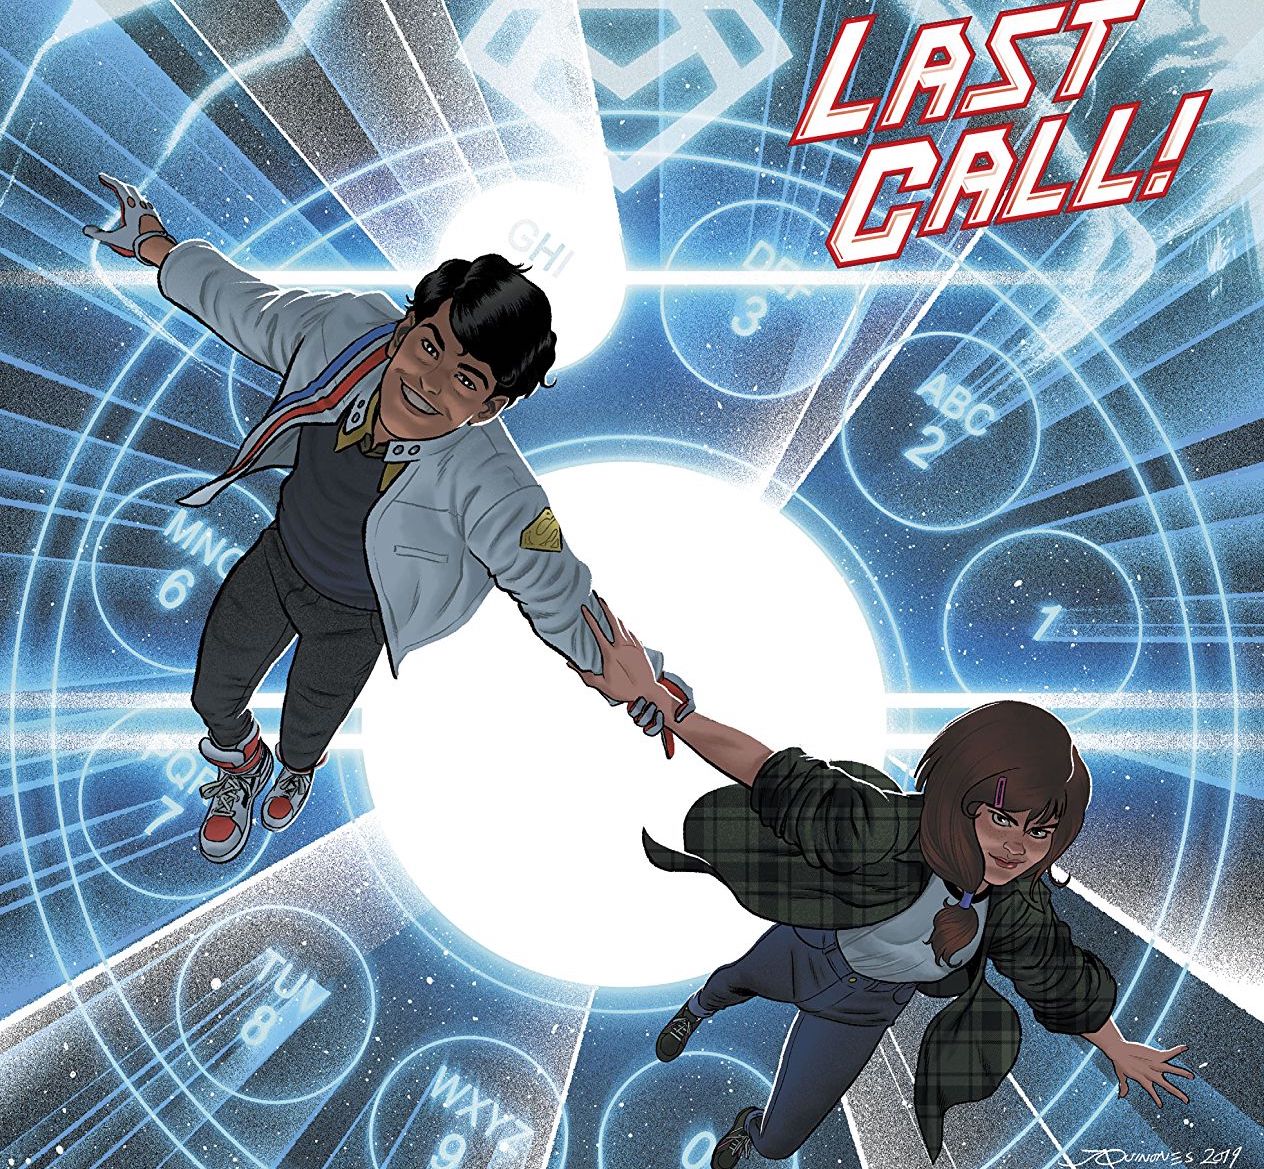 Dial H for Hero #12 Review